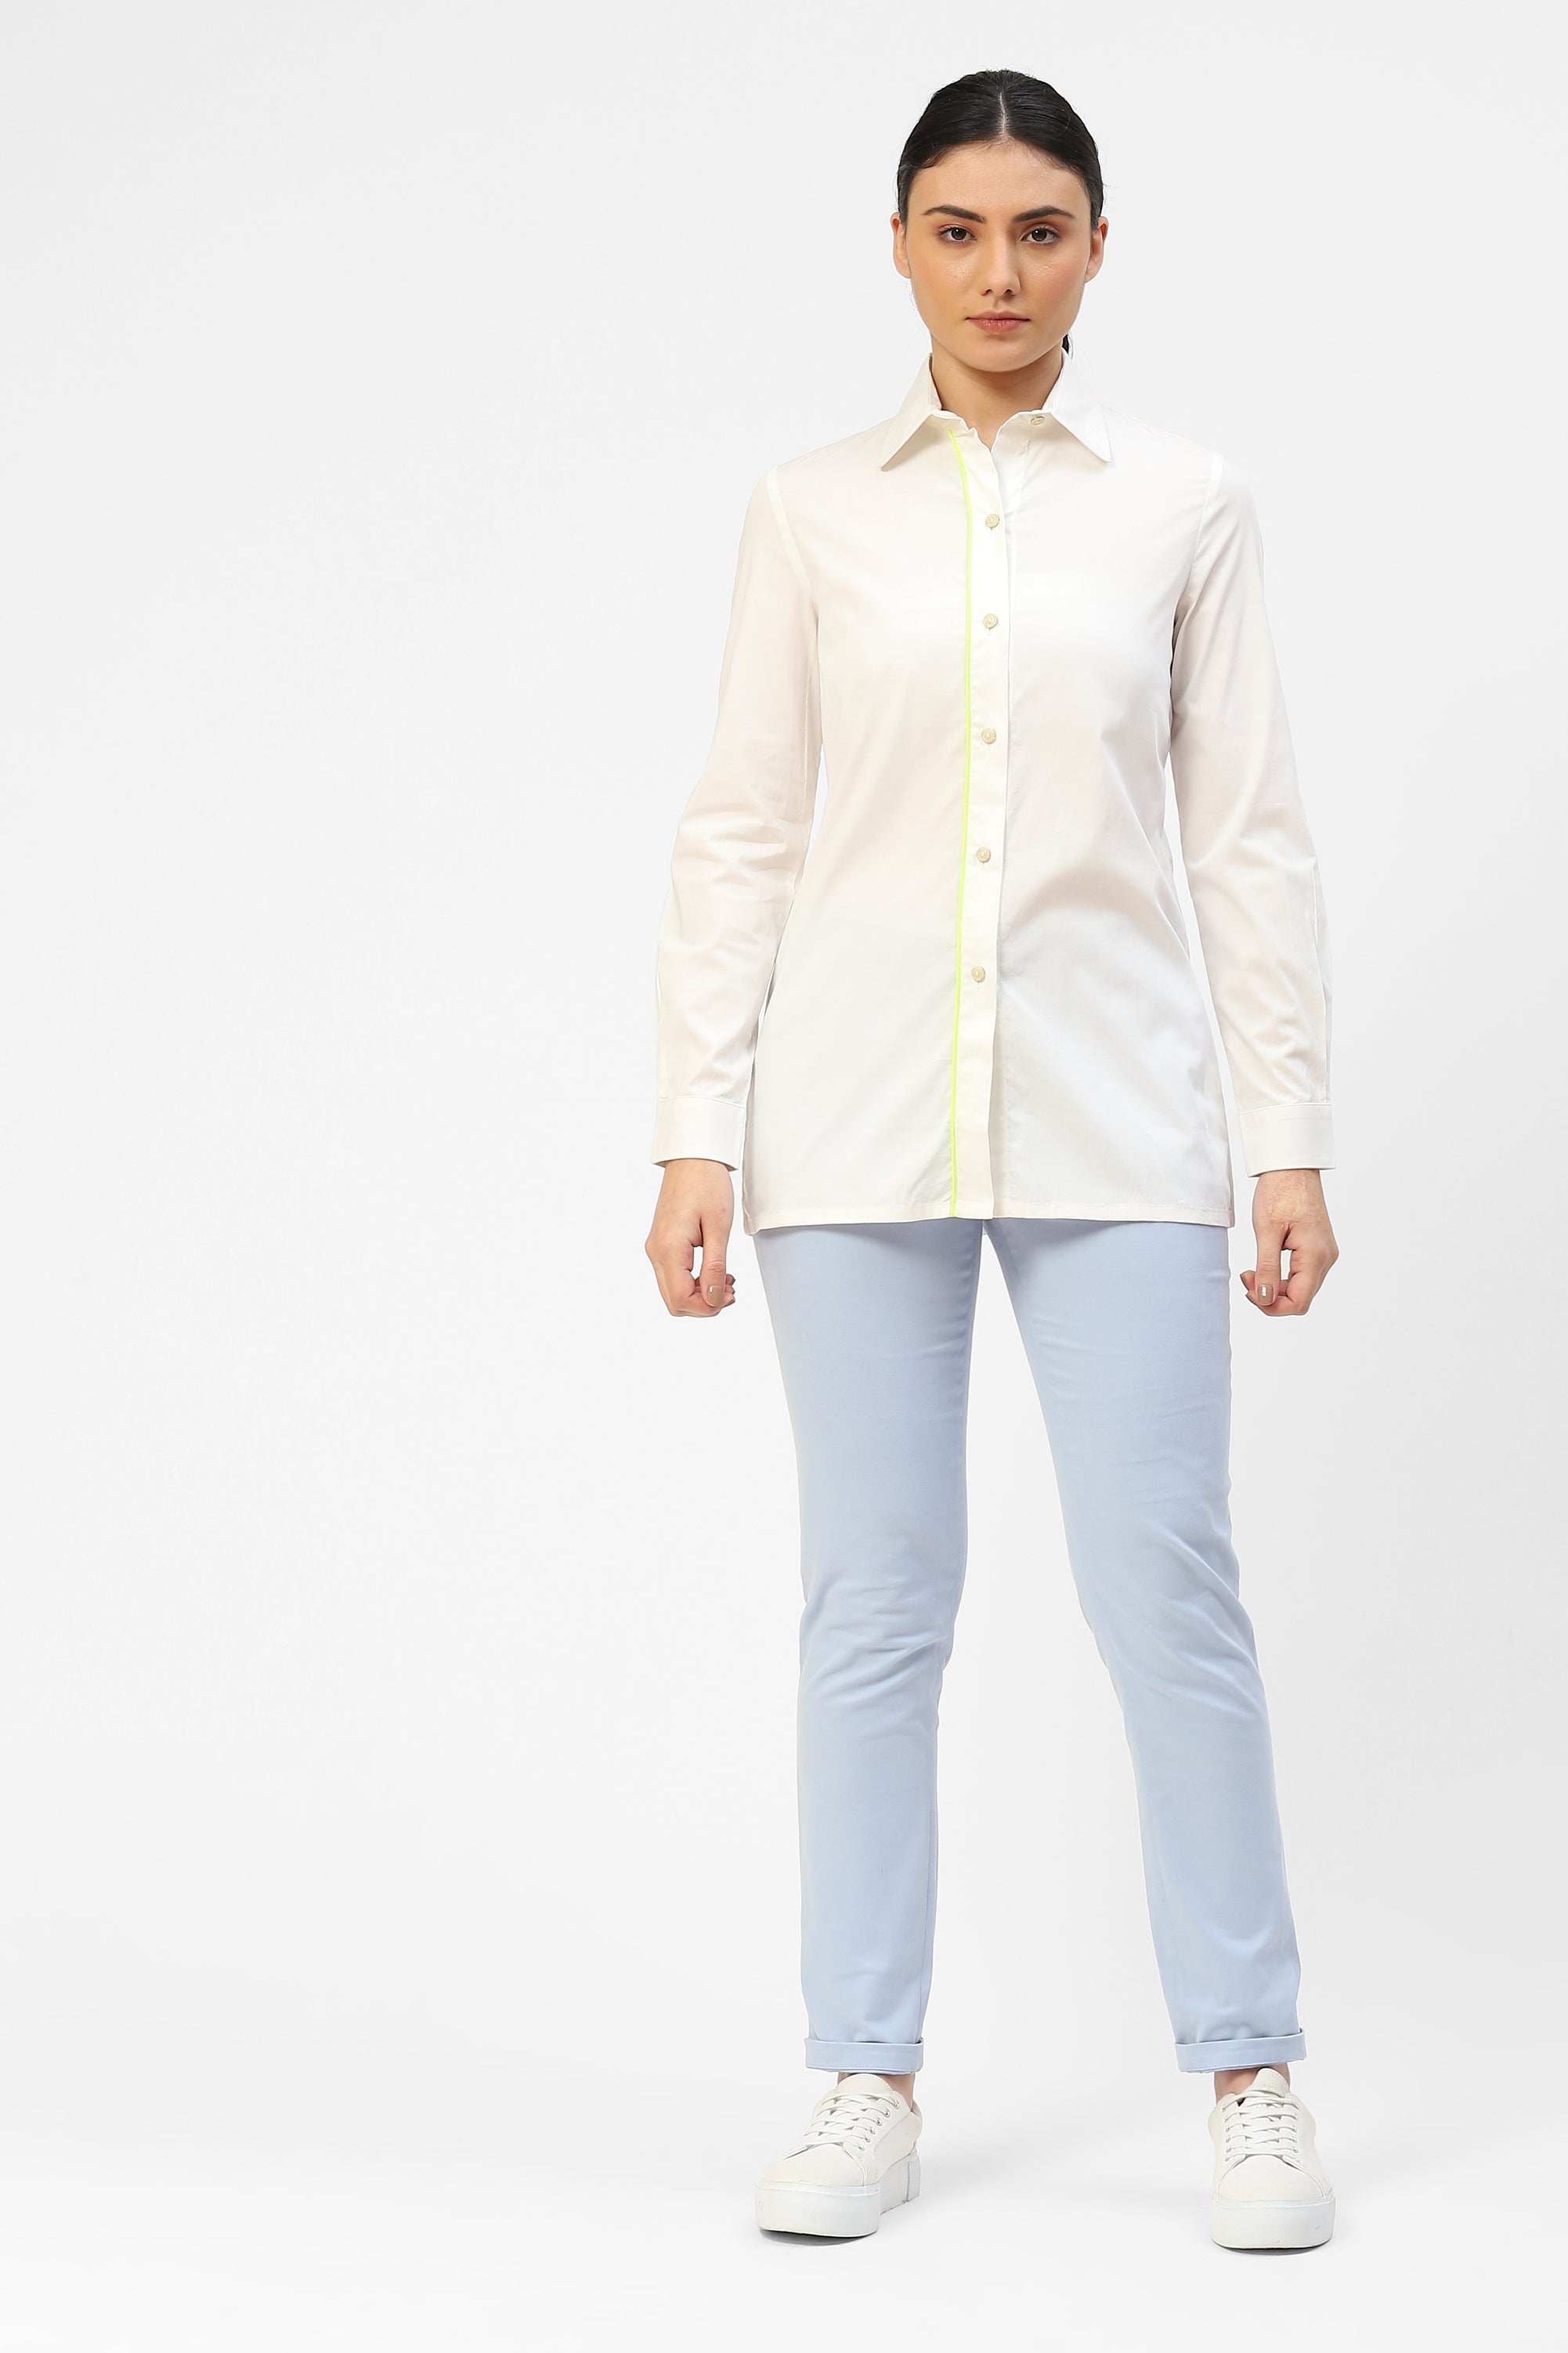 White Poplin Womens Shirt With Lime Green Piping Placket Detail